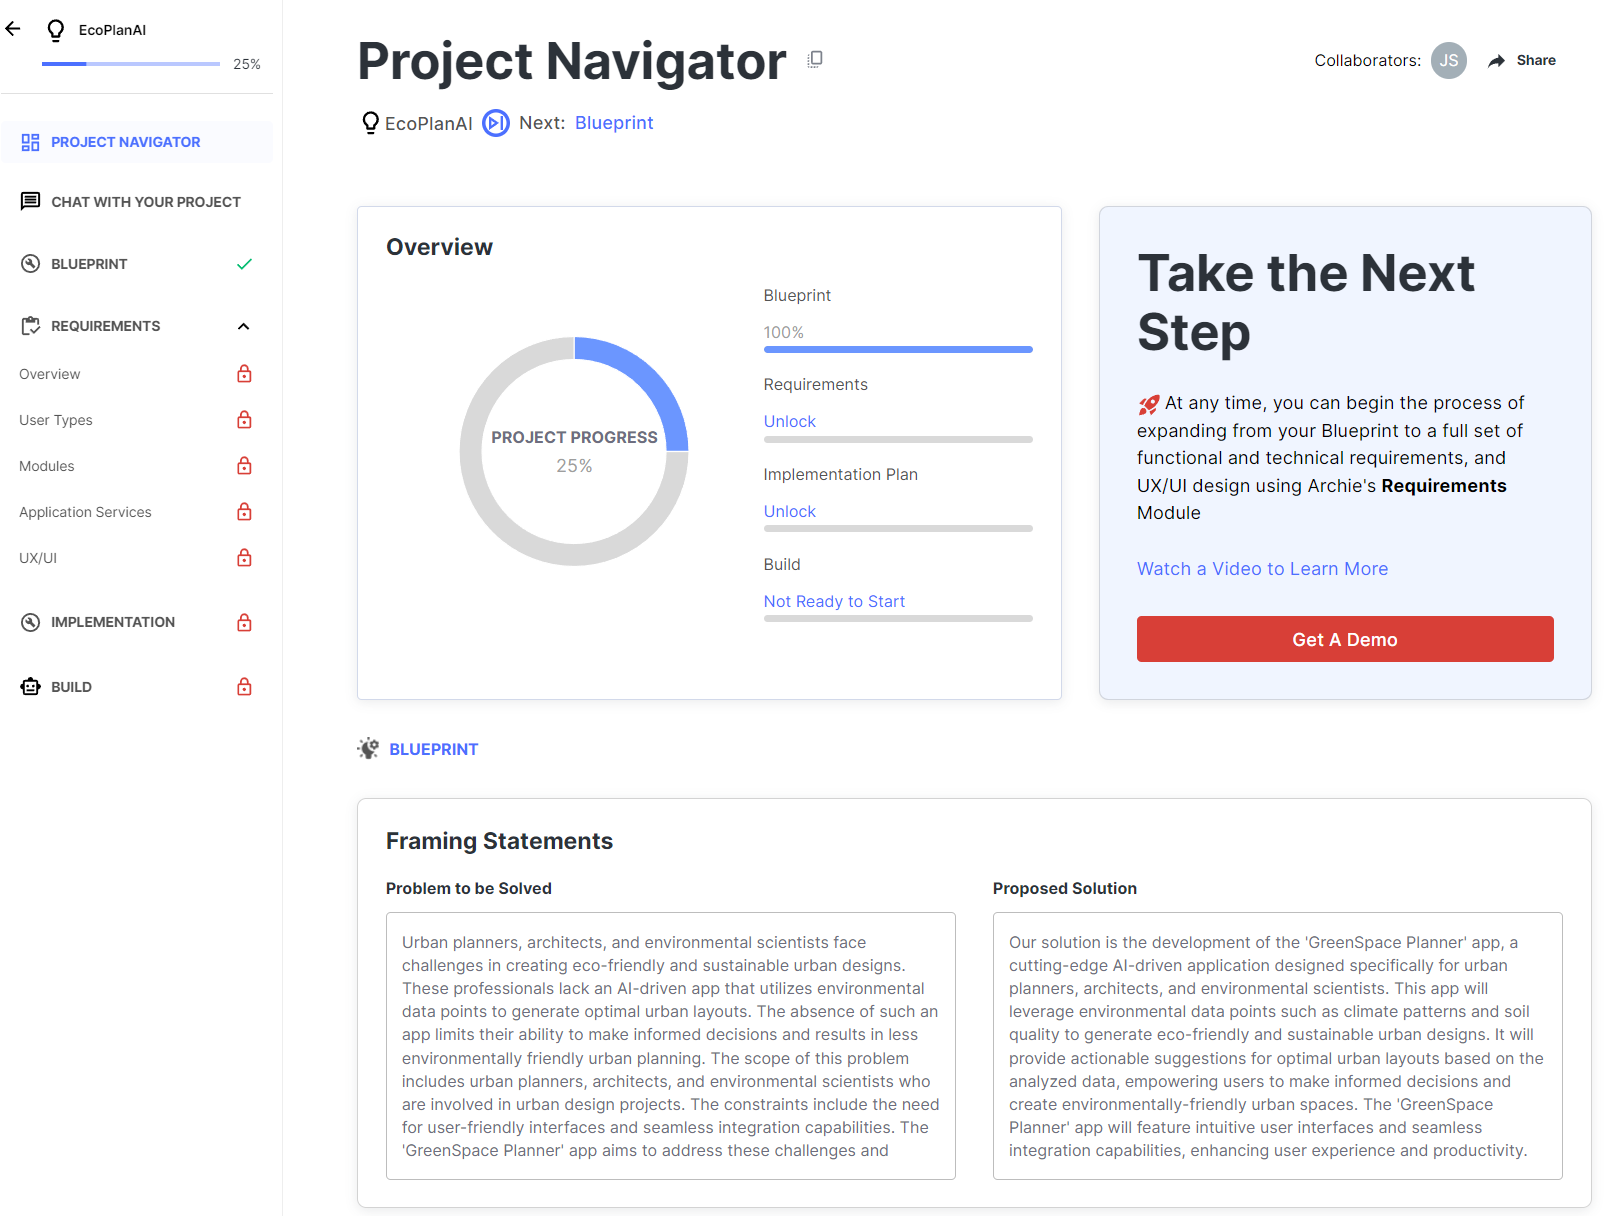 Project Navigator overview